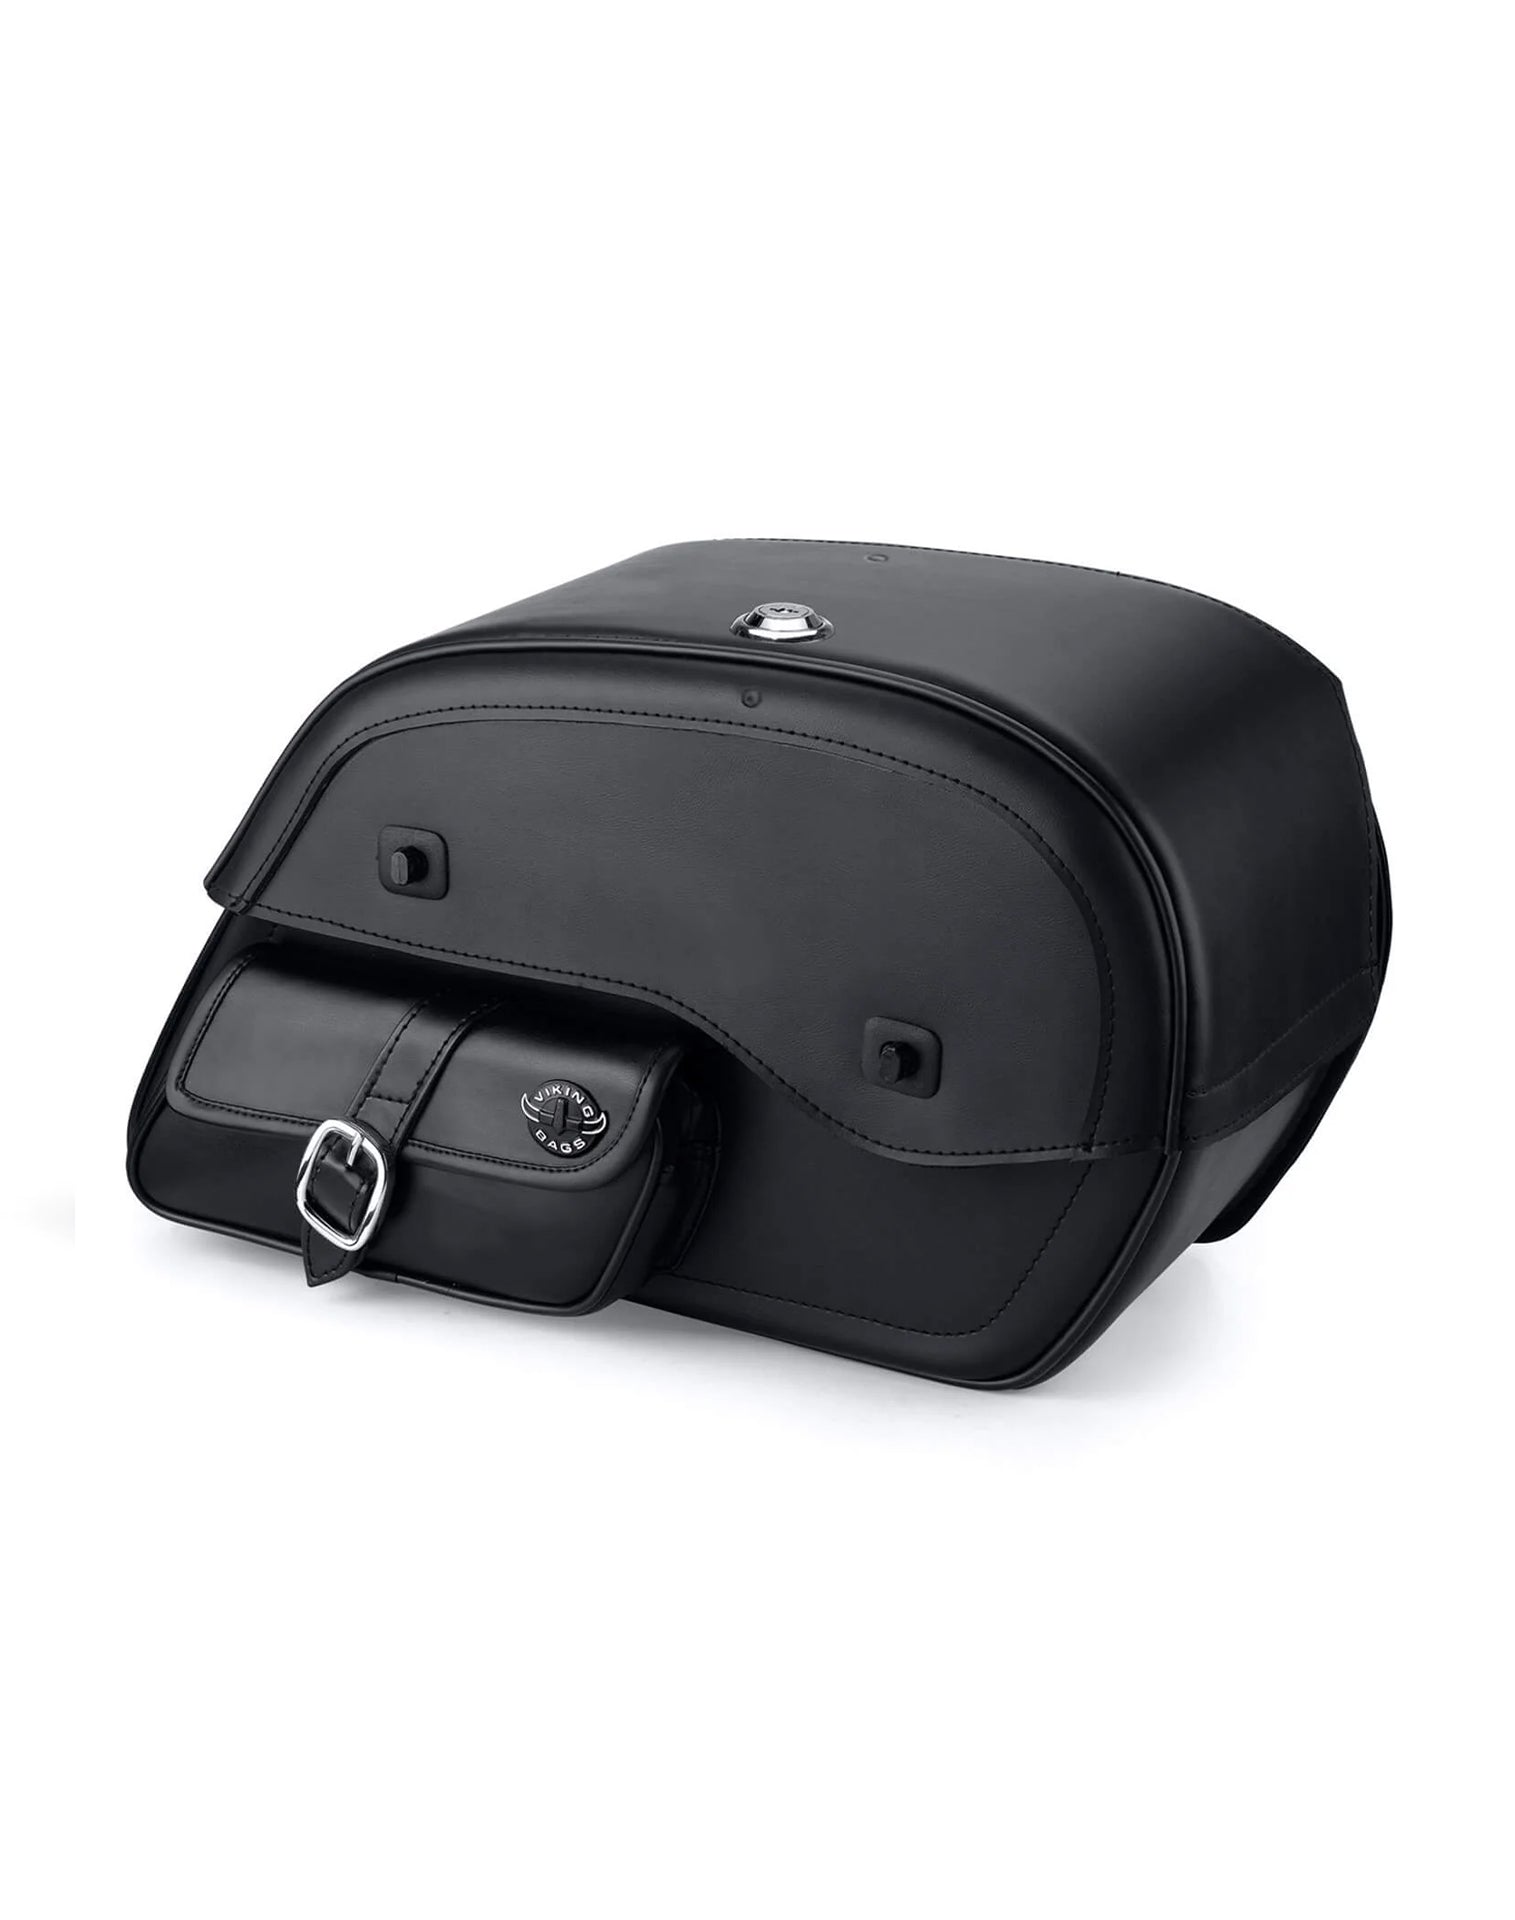 Indian Scout Sixty Motorcycle Saddlebags - Viking Bags